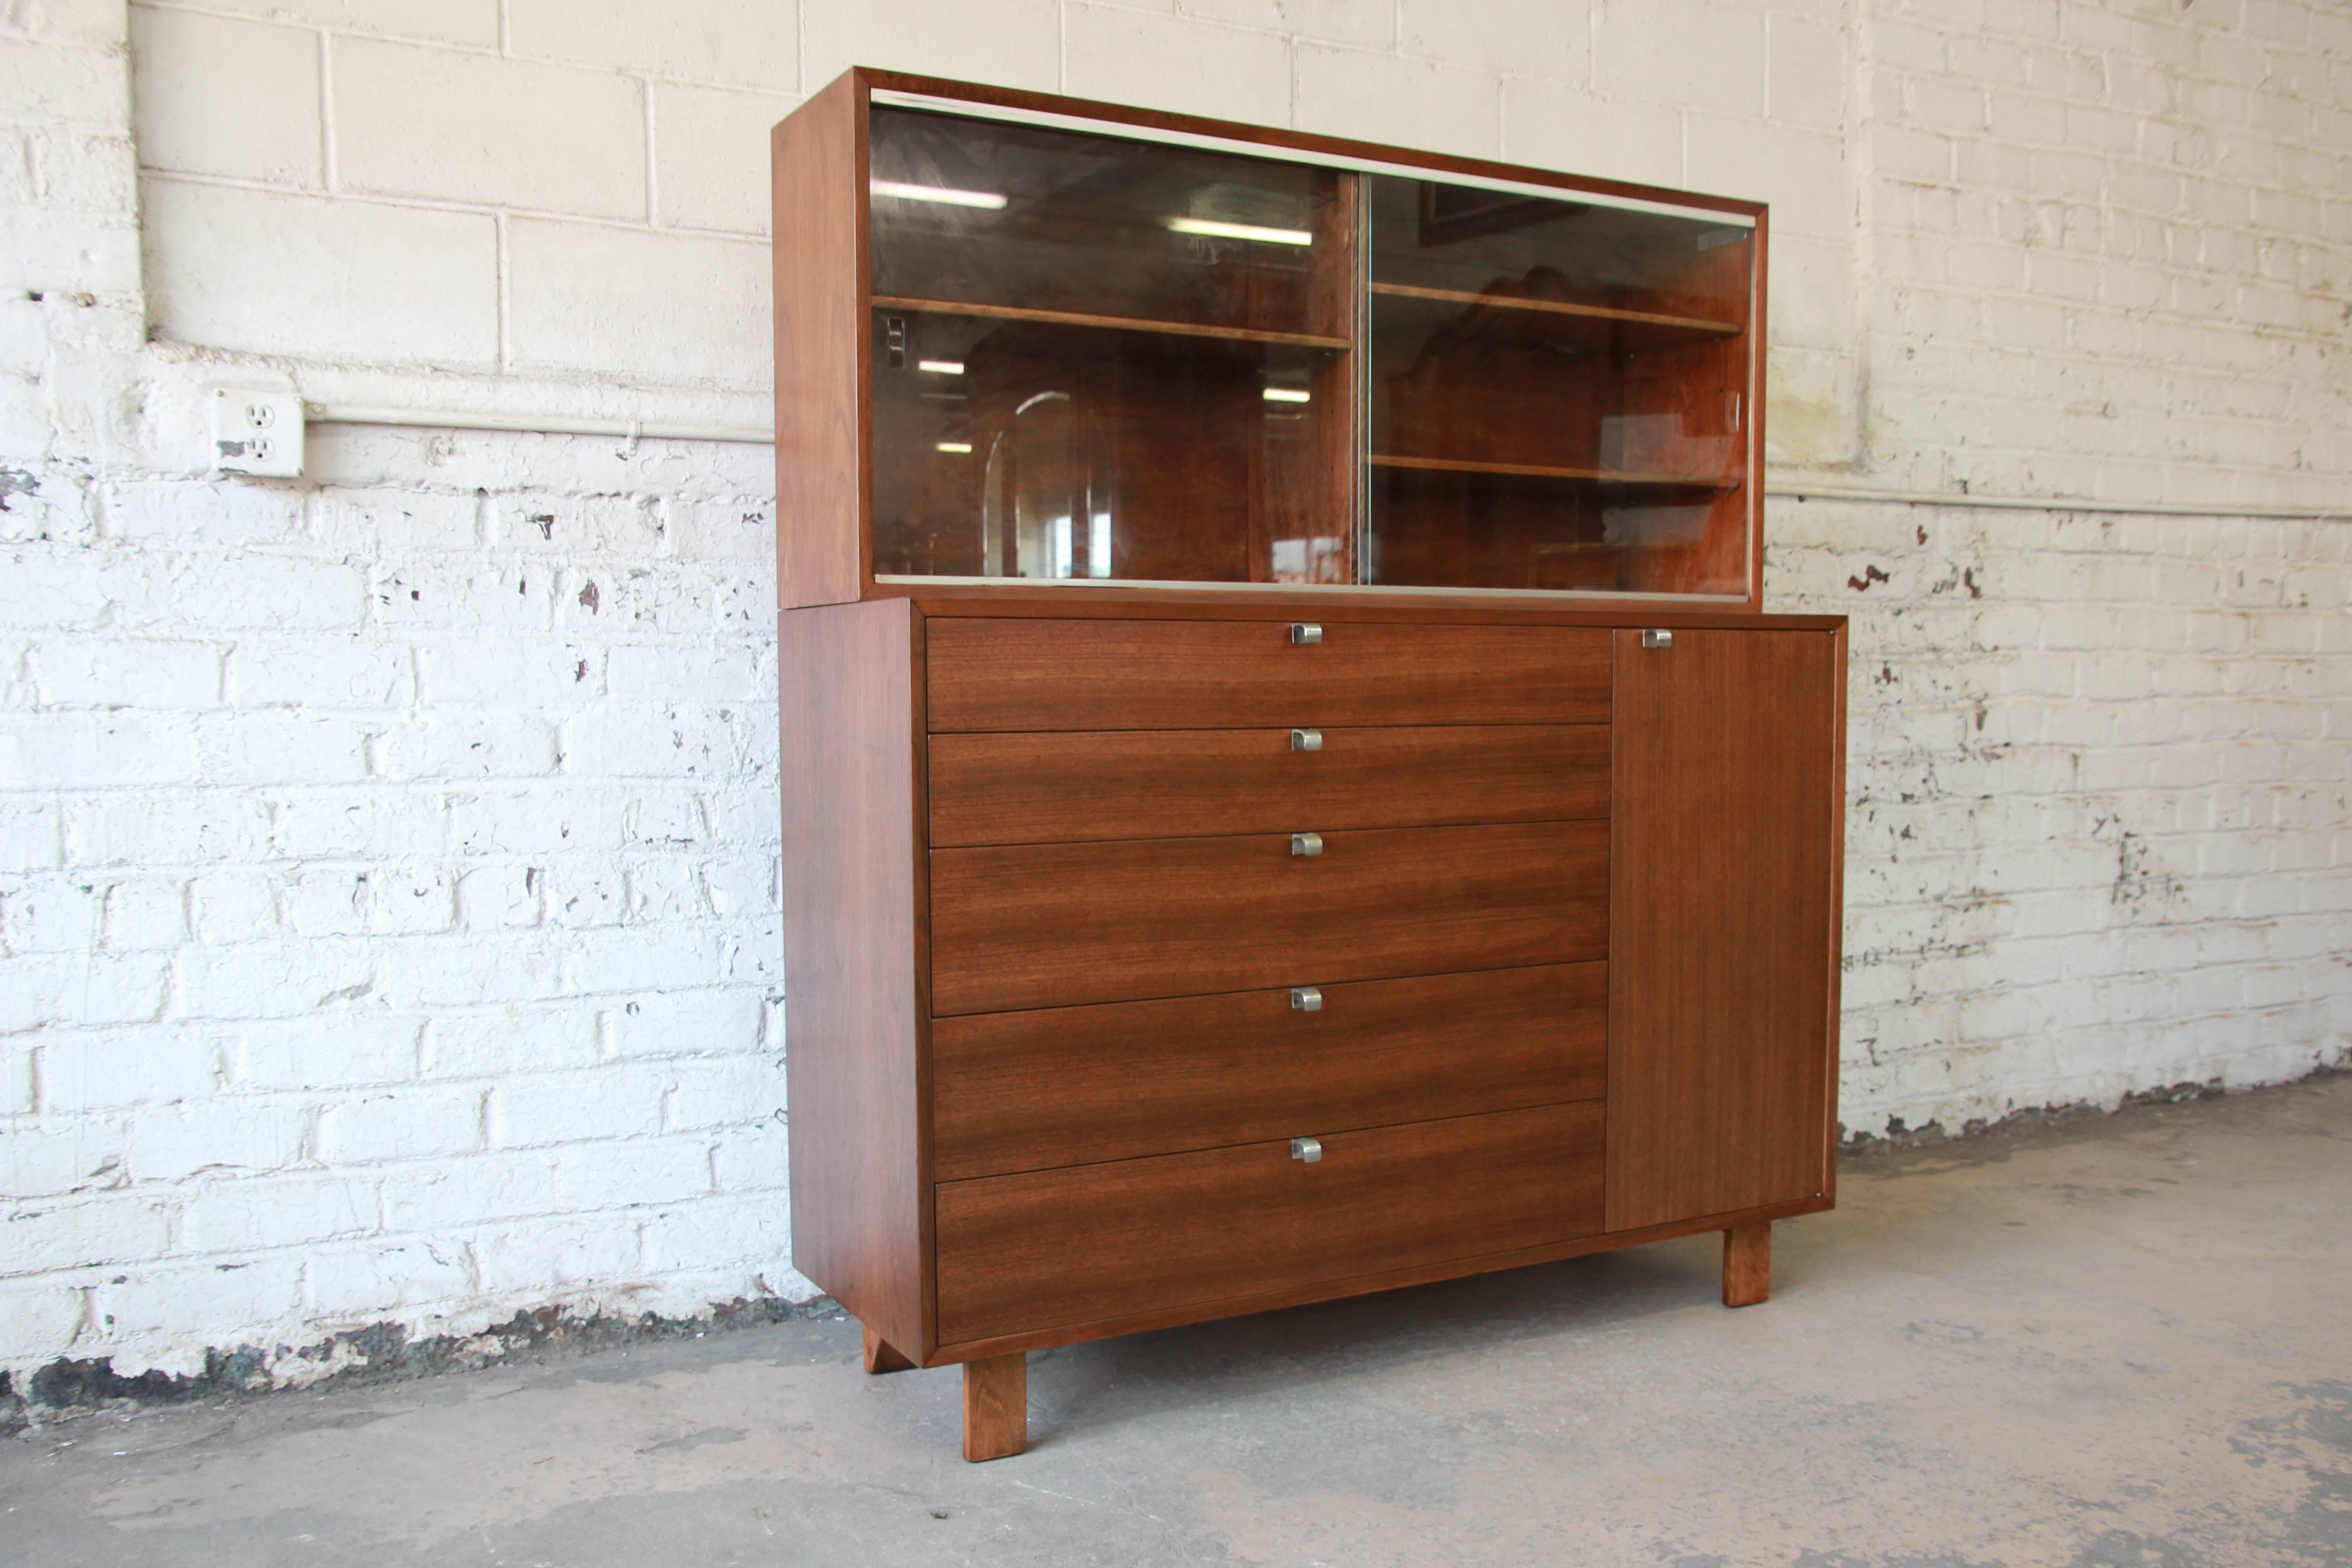 Offering an outstanding George Nelson sideboard for Herman Miller. This piece is from the 